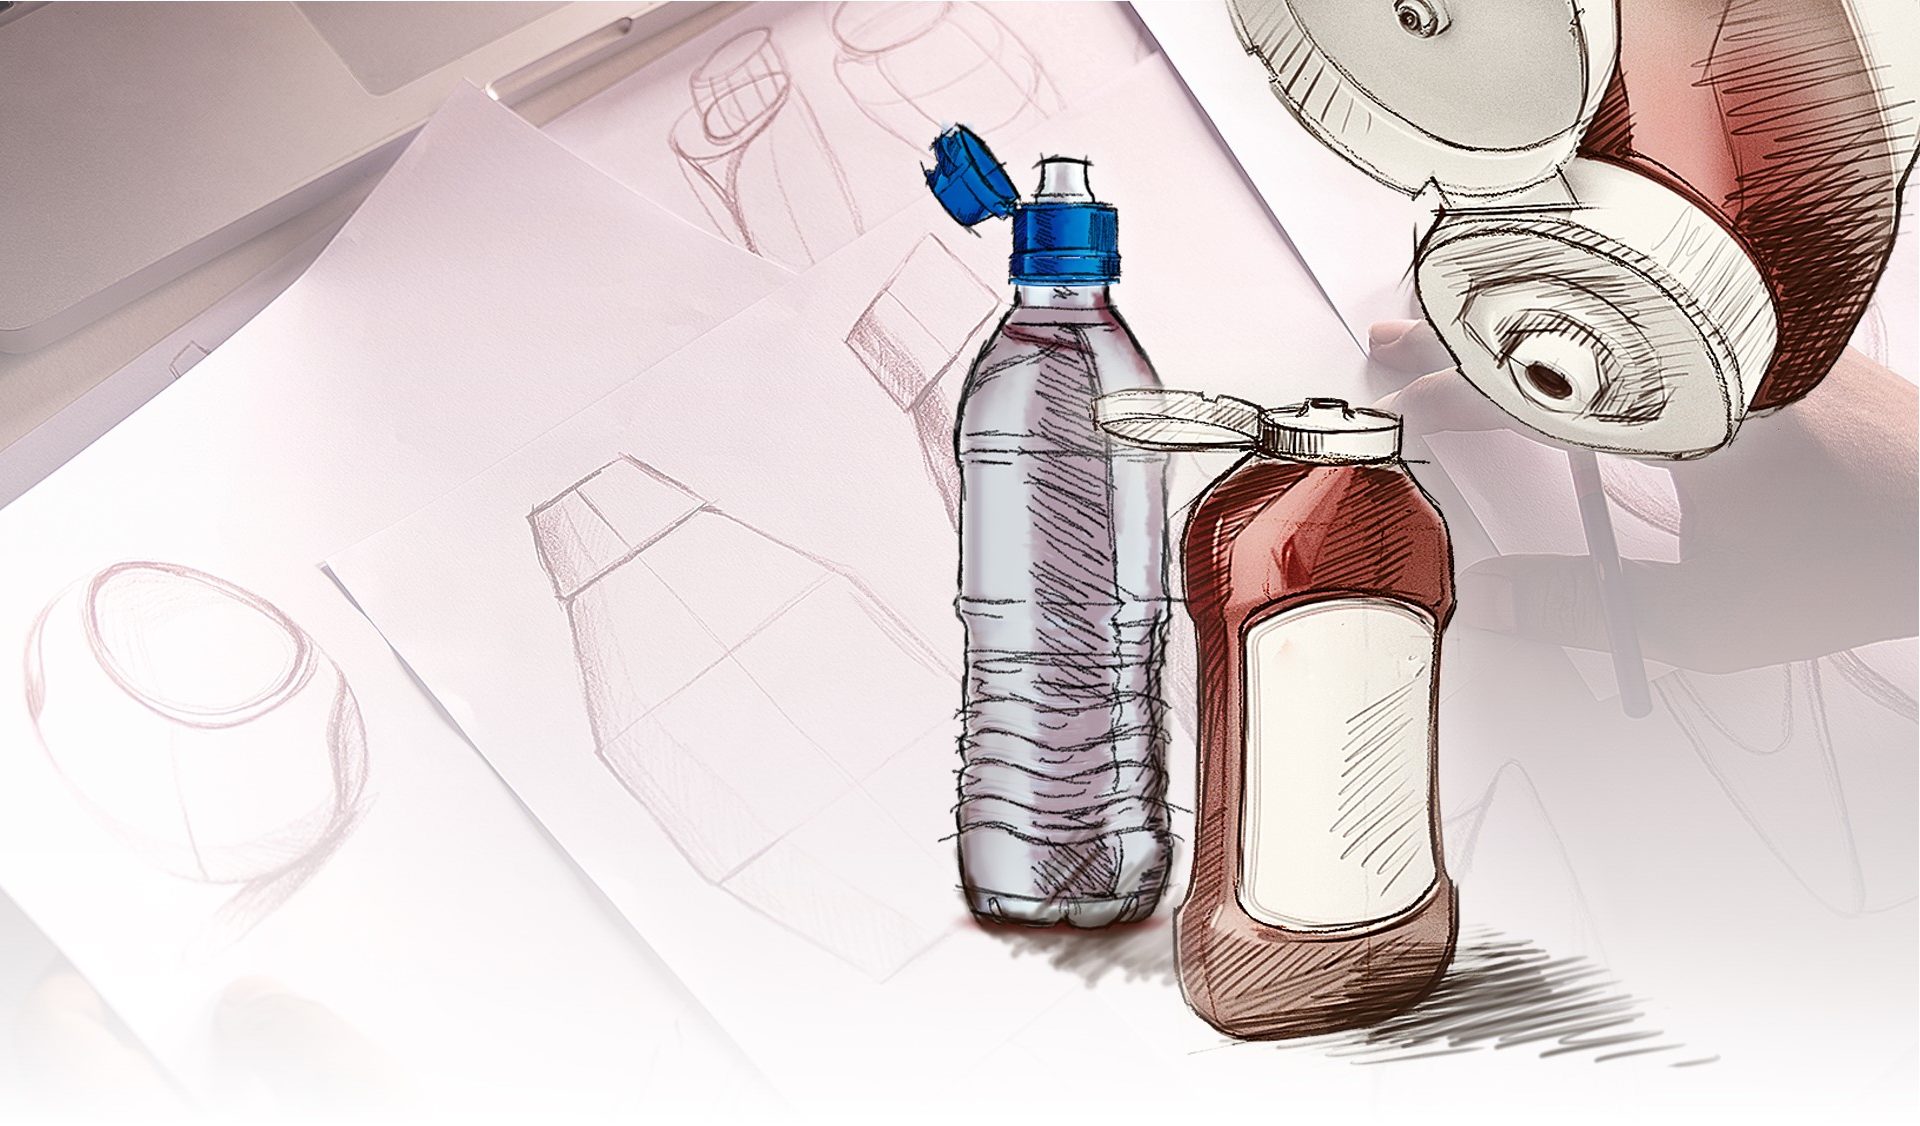 Product sketches of sports drink bottle and ketchup bottle with closures